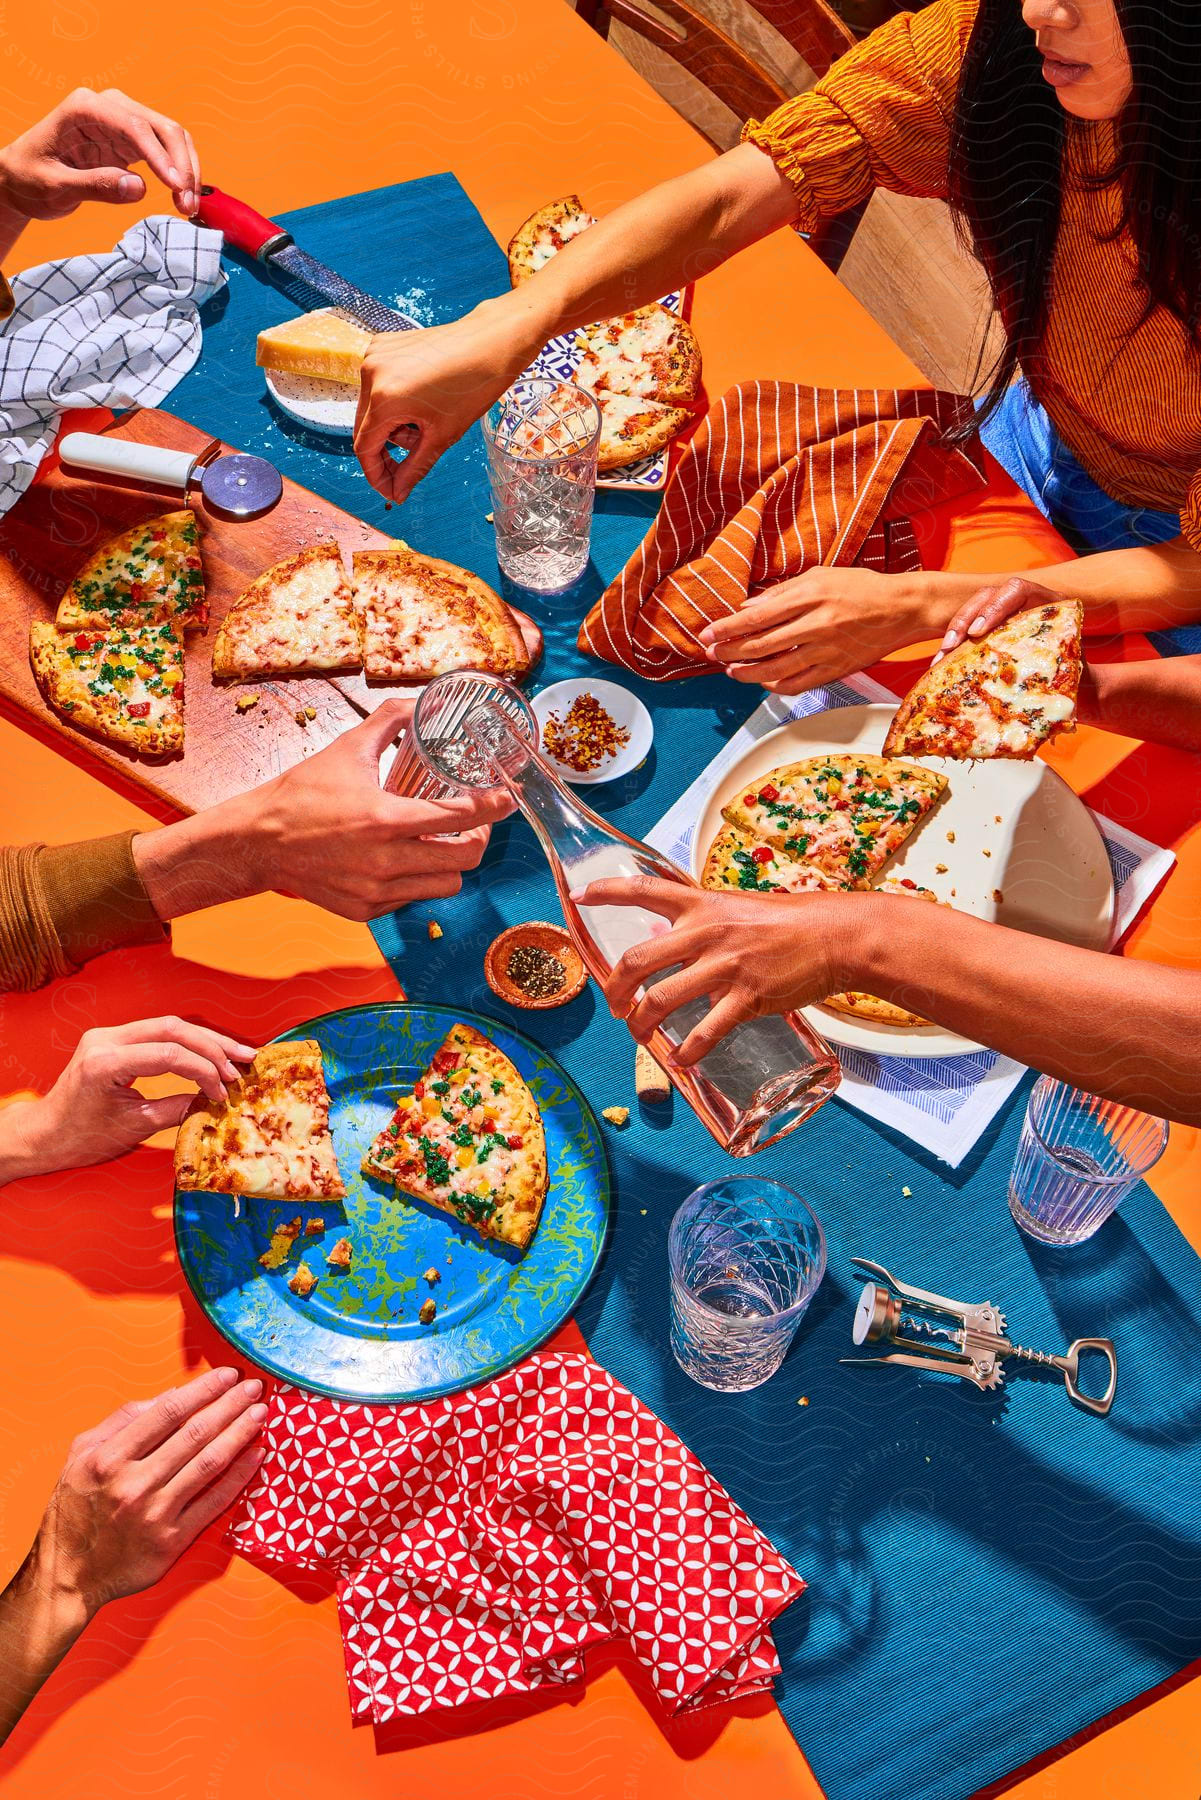 A group enjoying a pizza meal together